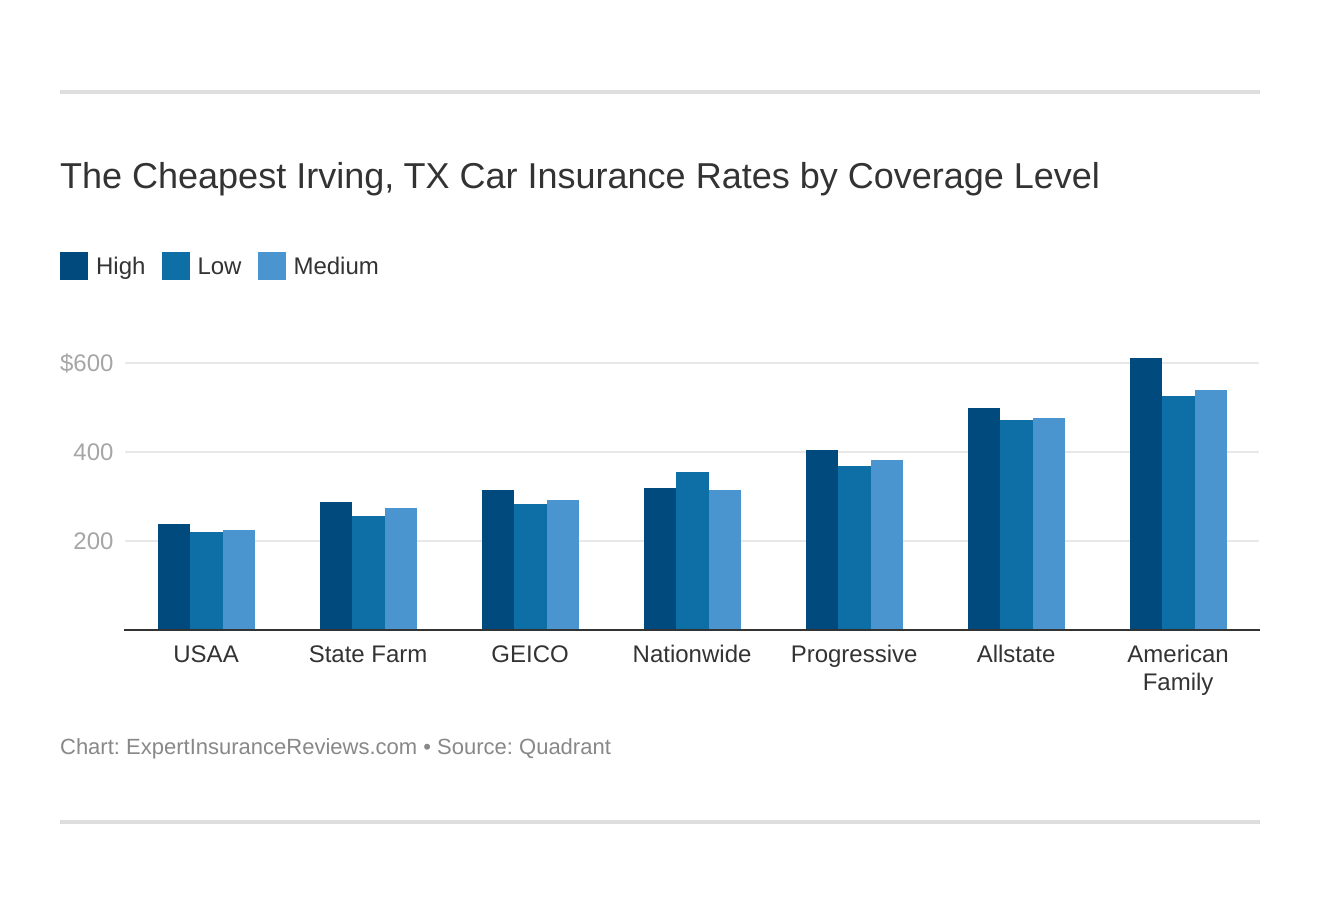 The Cheapest Irving, TX Car Insurance Rates by Coverage Level